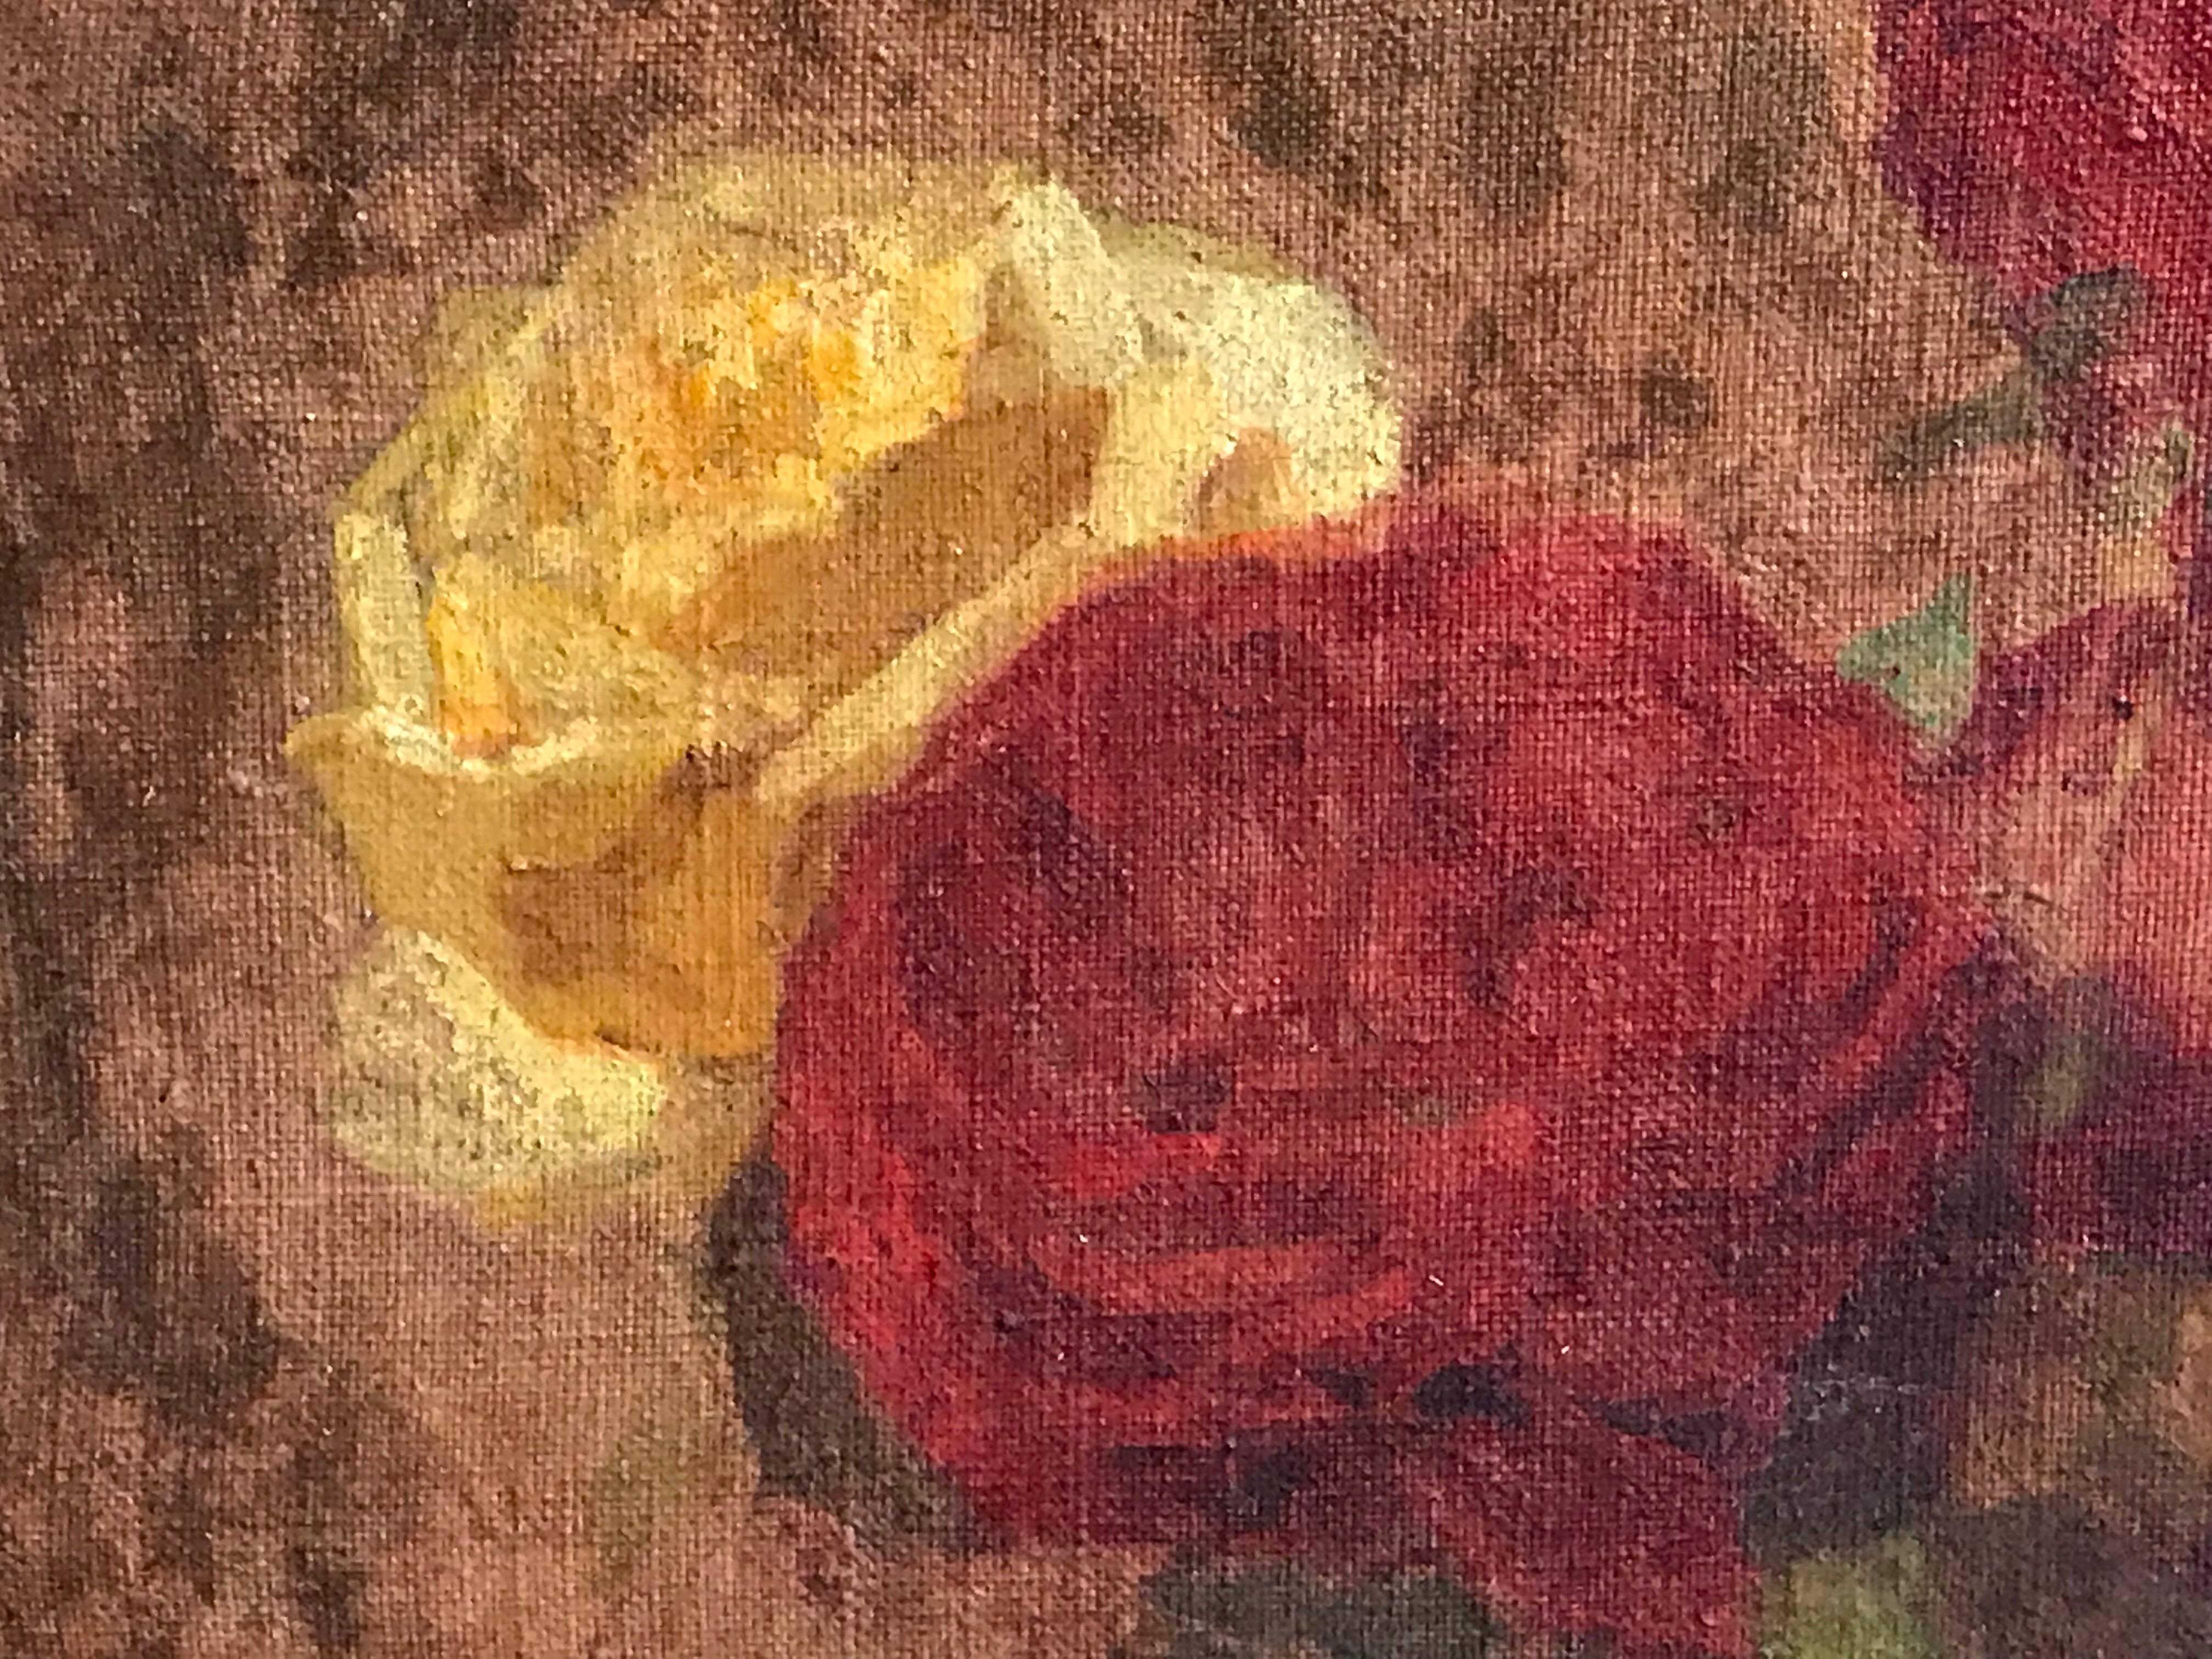 Vase de Roses
by Eugene Schlumberger (French 1879-1960)
signed lower left
oil painting on canvas, framed
painting: 41cm x 27cm

Delightful French Impressionist oil painting on canvas depicting this simple but elegant arrangement of roses within a